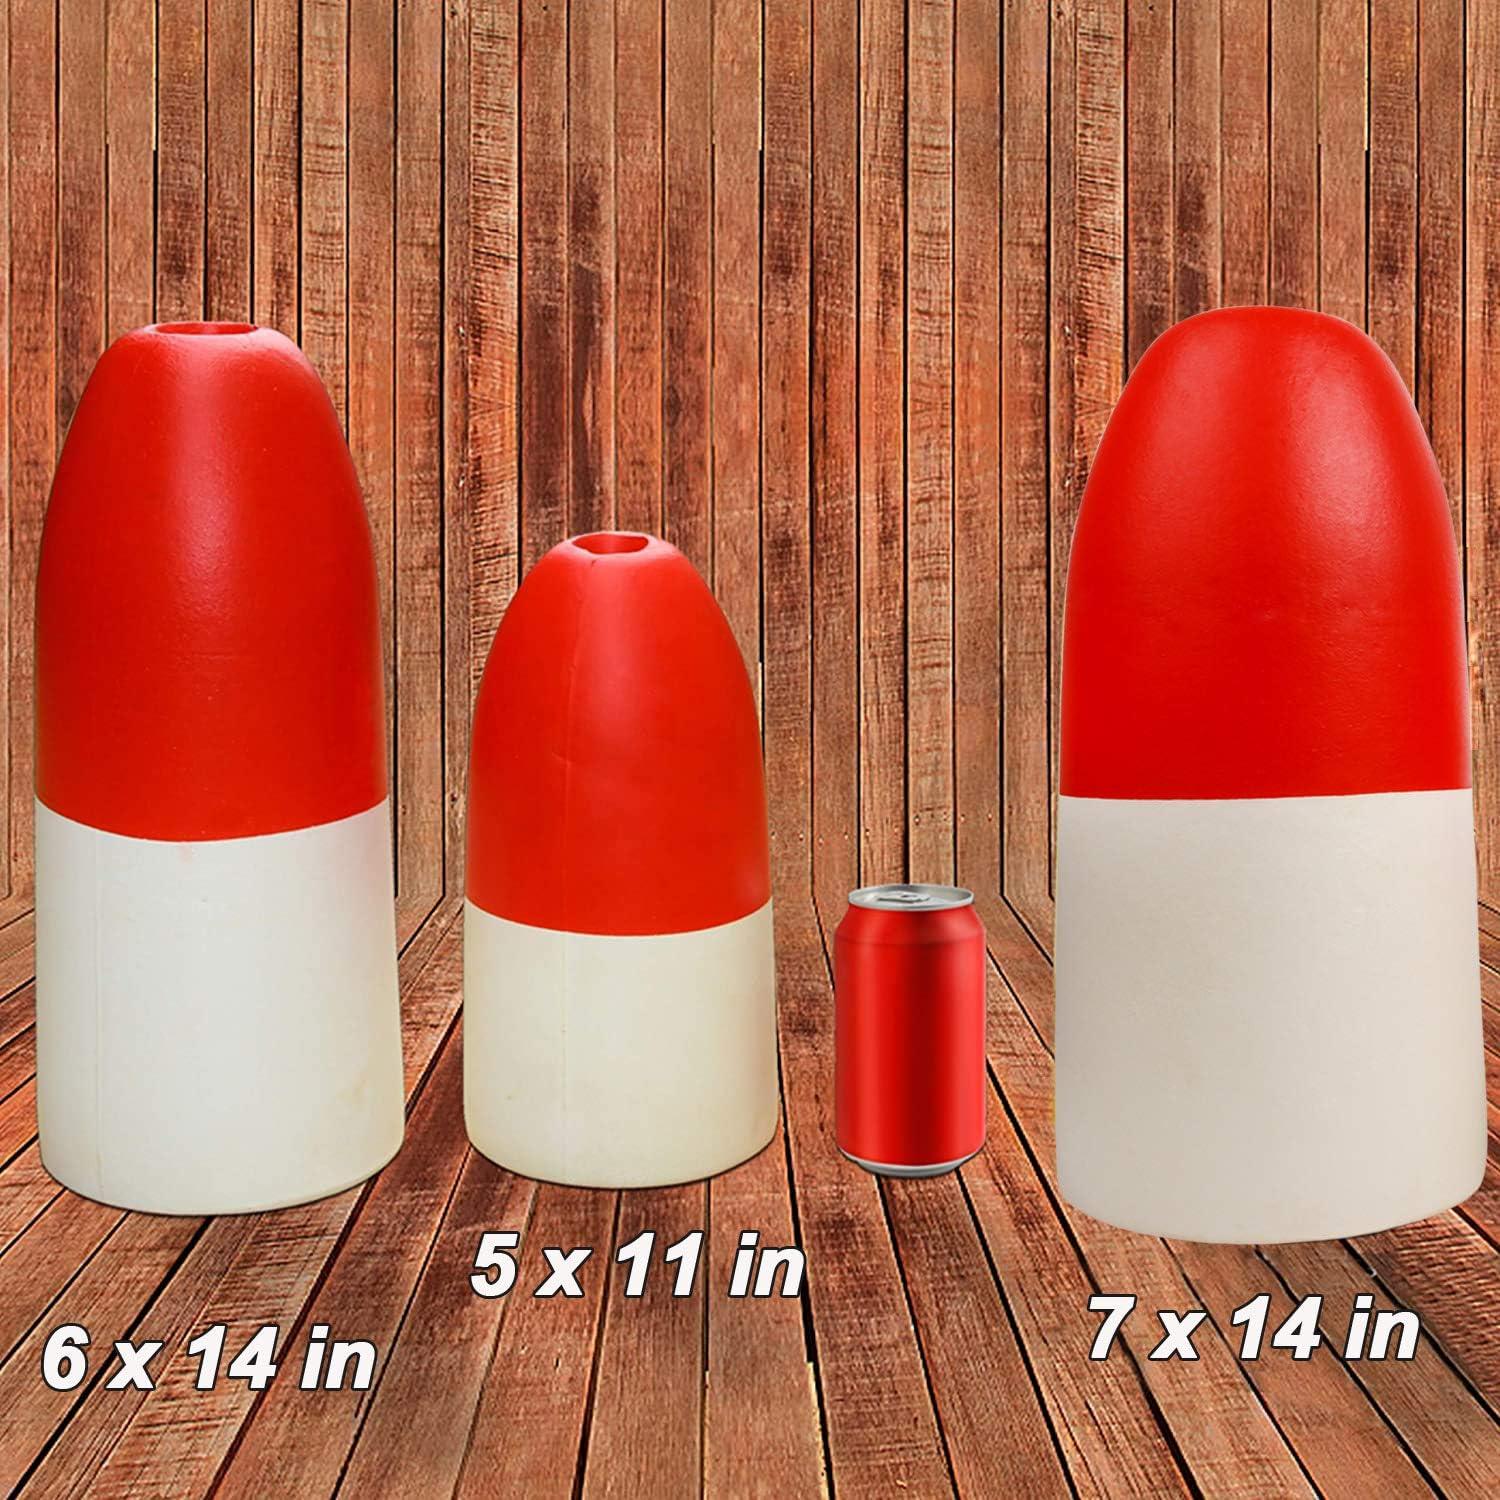  Crab Fishing Trap Floats Buoy - Kayak Outrigger Stabilizer Crab  Pot Markers 5x11 6x14 7x14 Inch Red/White